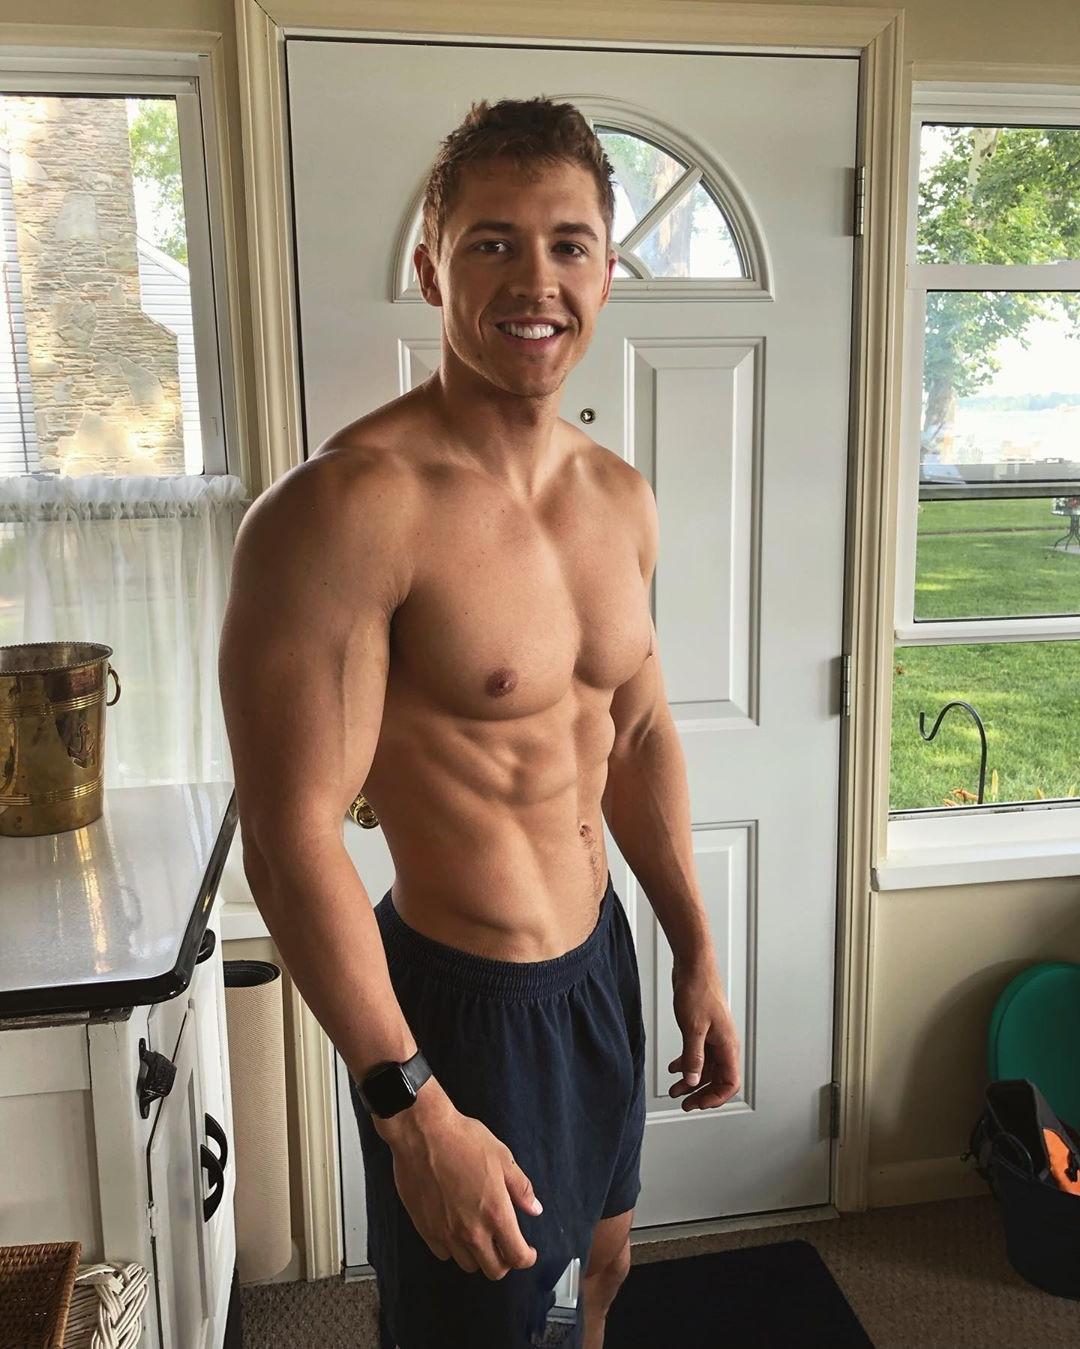 cute-dude-neighbor-next-door-smiling-beefy-muscle-bare-chest-body-huge-arms-pecs